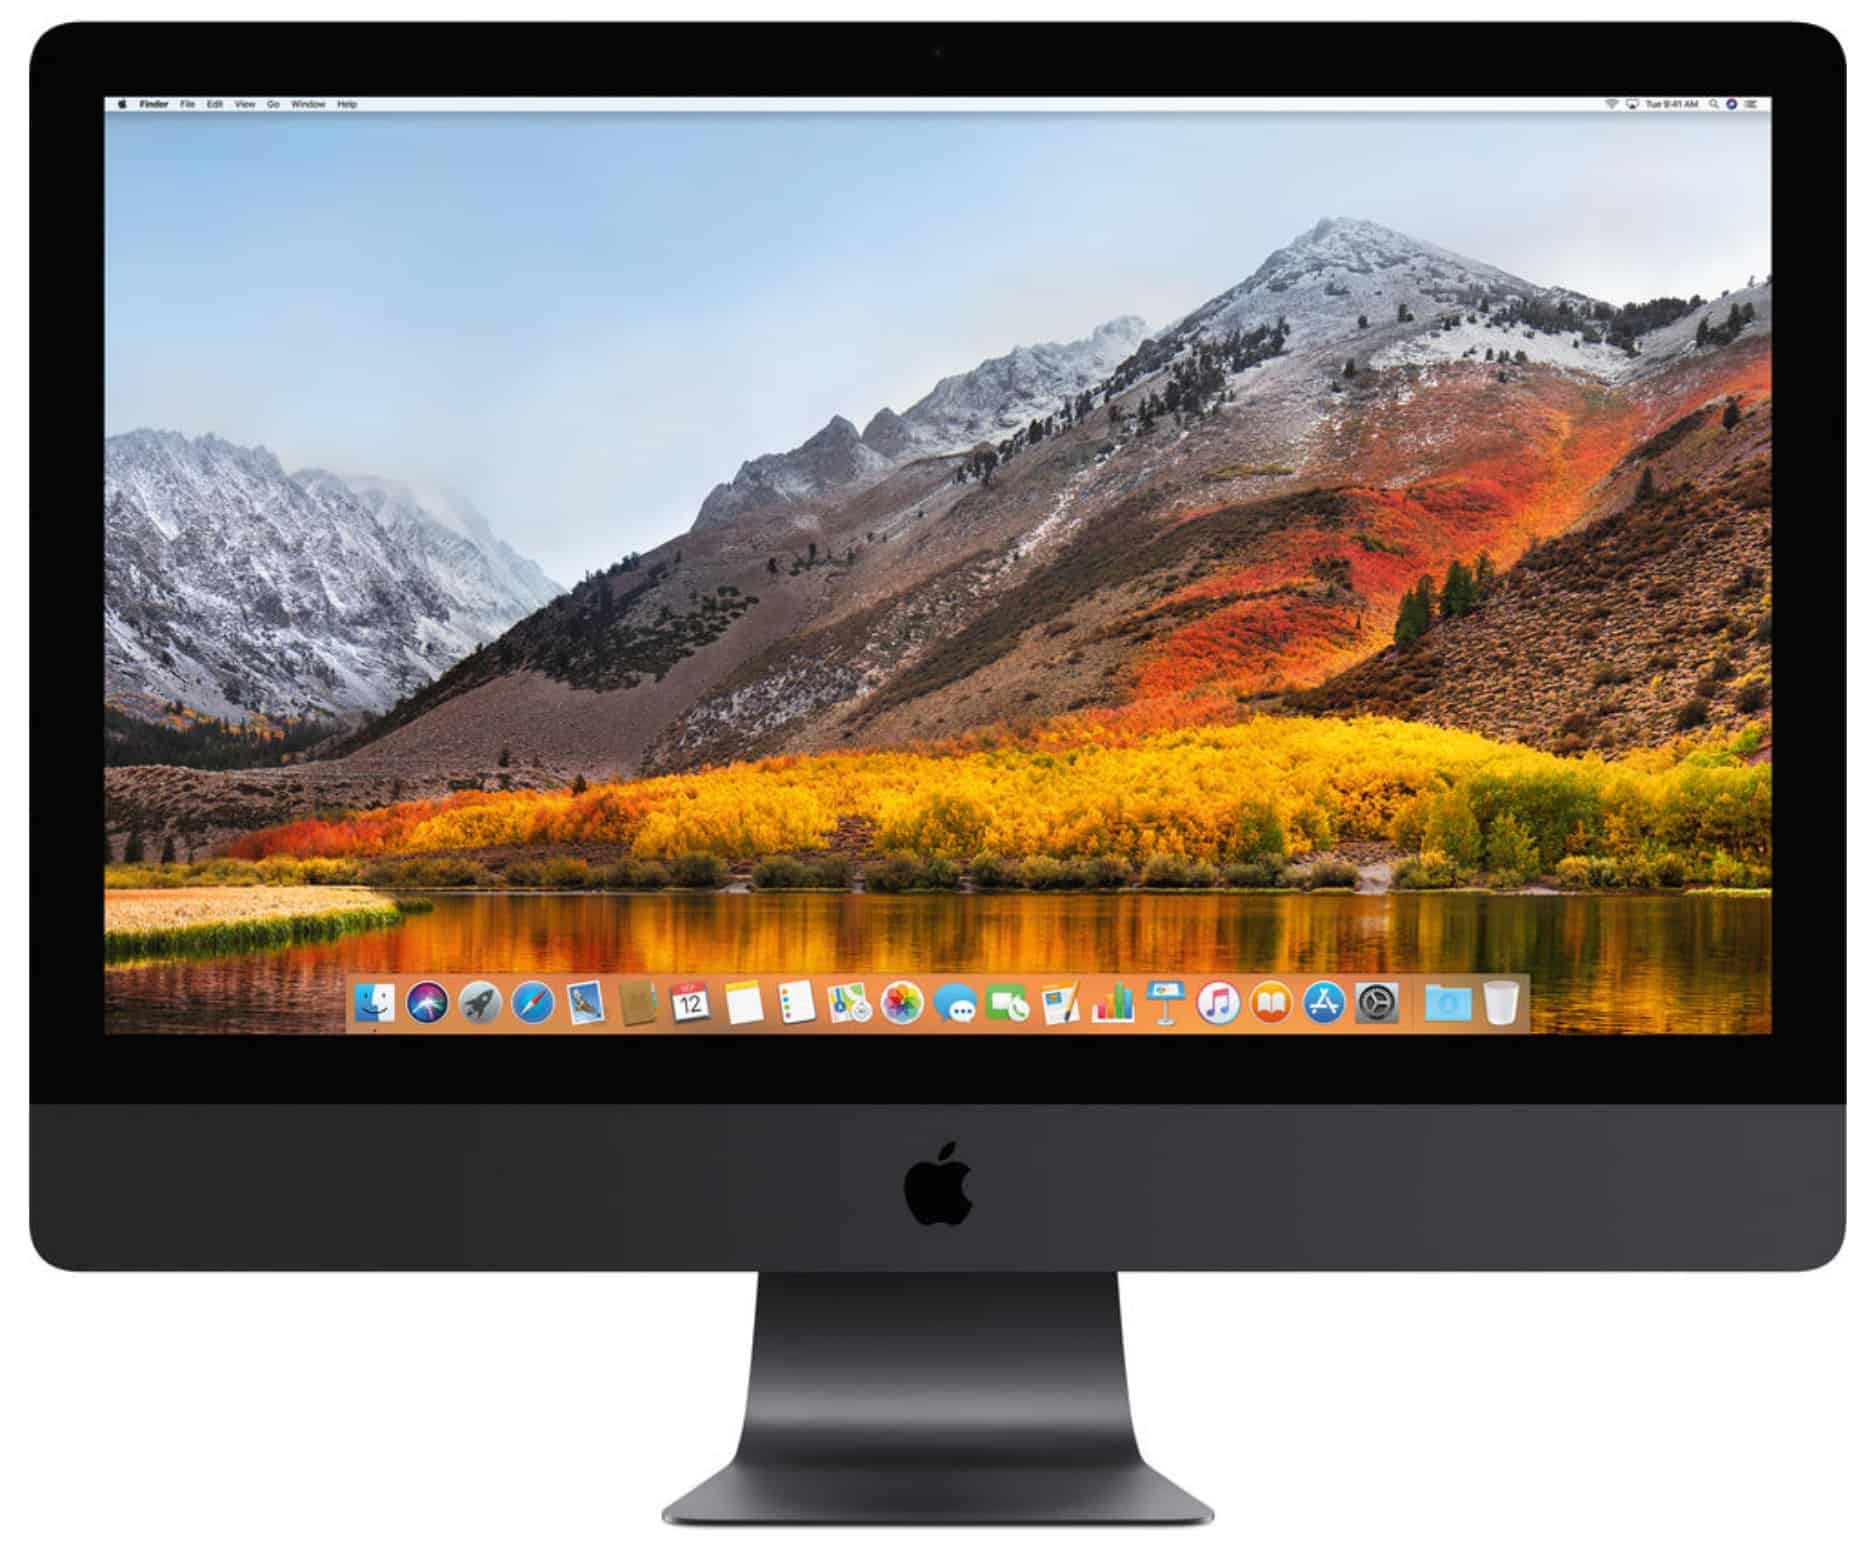 A surprising discount on the new iMac Pro is just one of this week's great Apple deals.